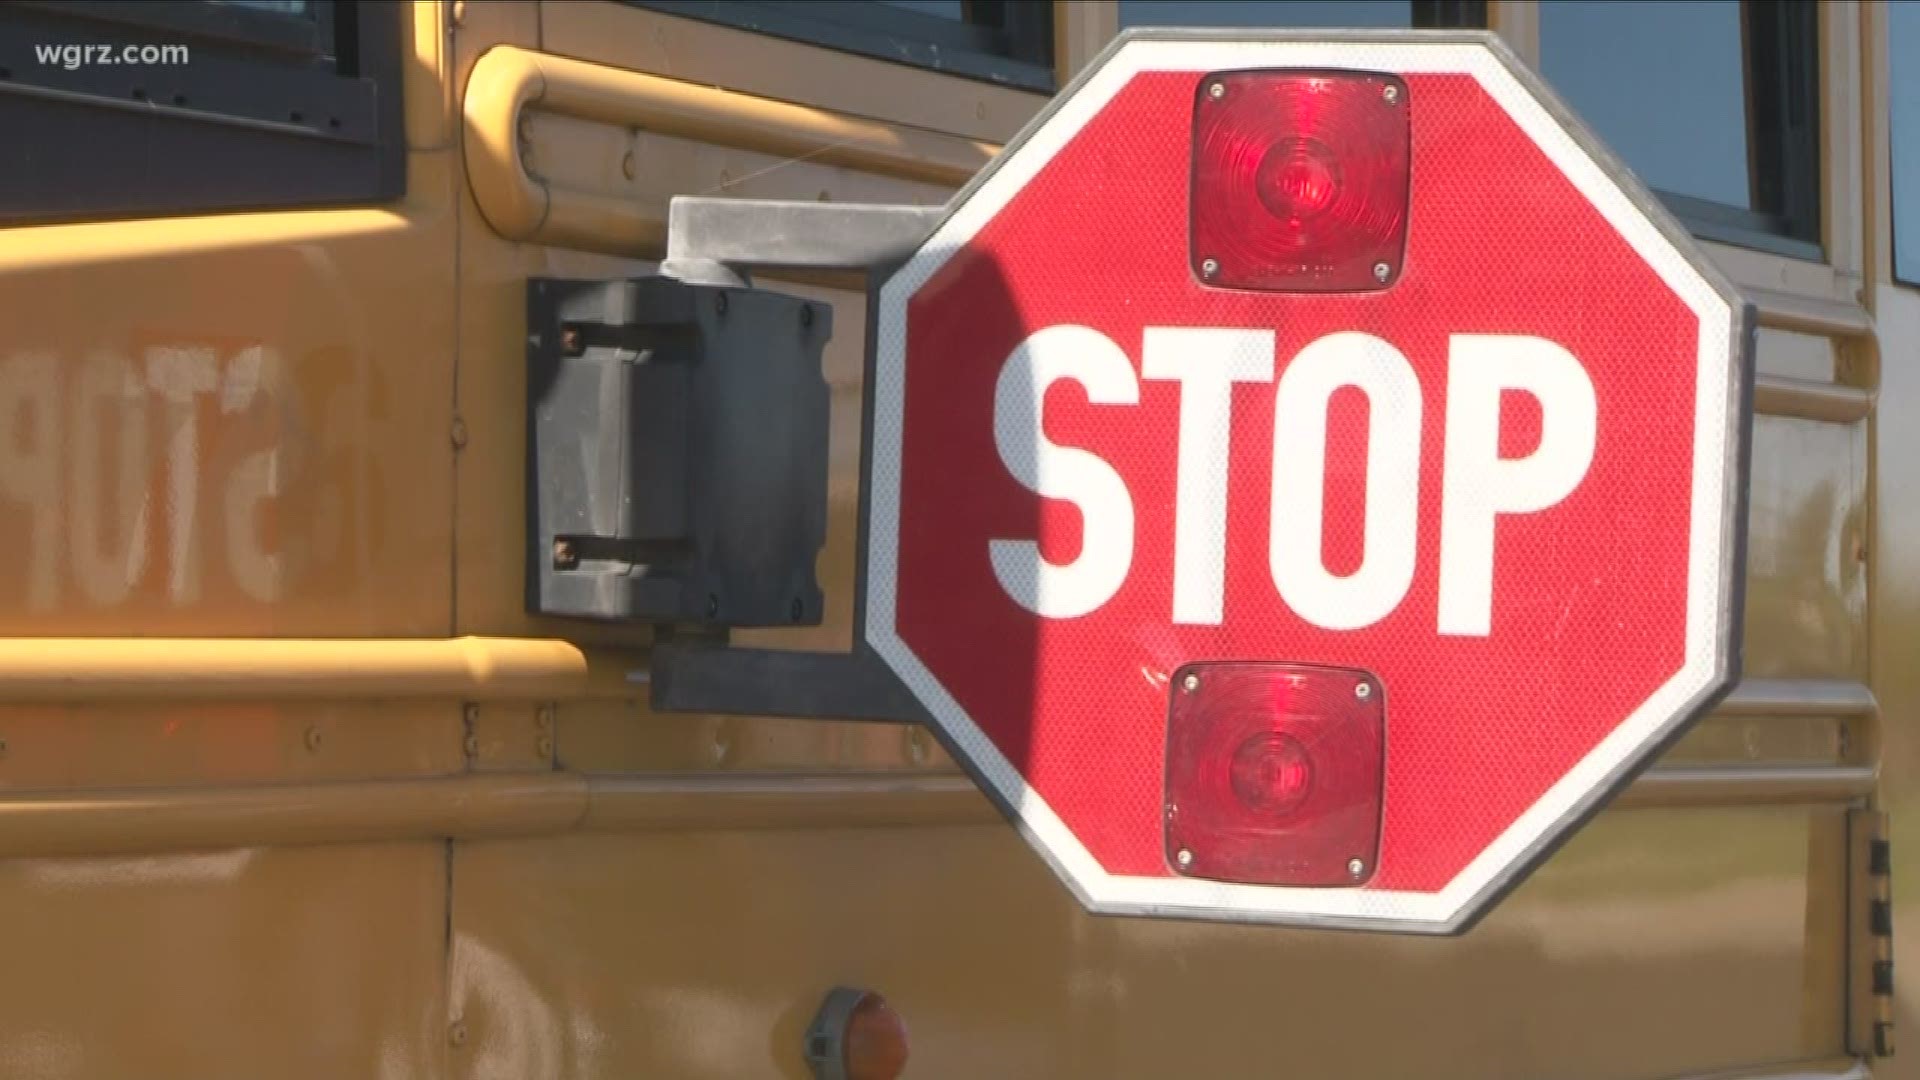 Through a pilot program, two buses are already equipped with cameras. In the first week, 20 vehicles were seen illegally passing stopped buses.